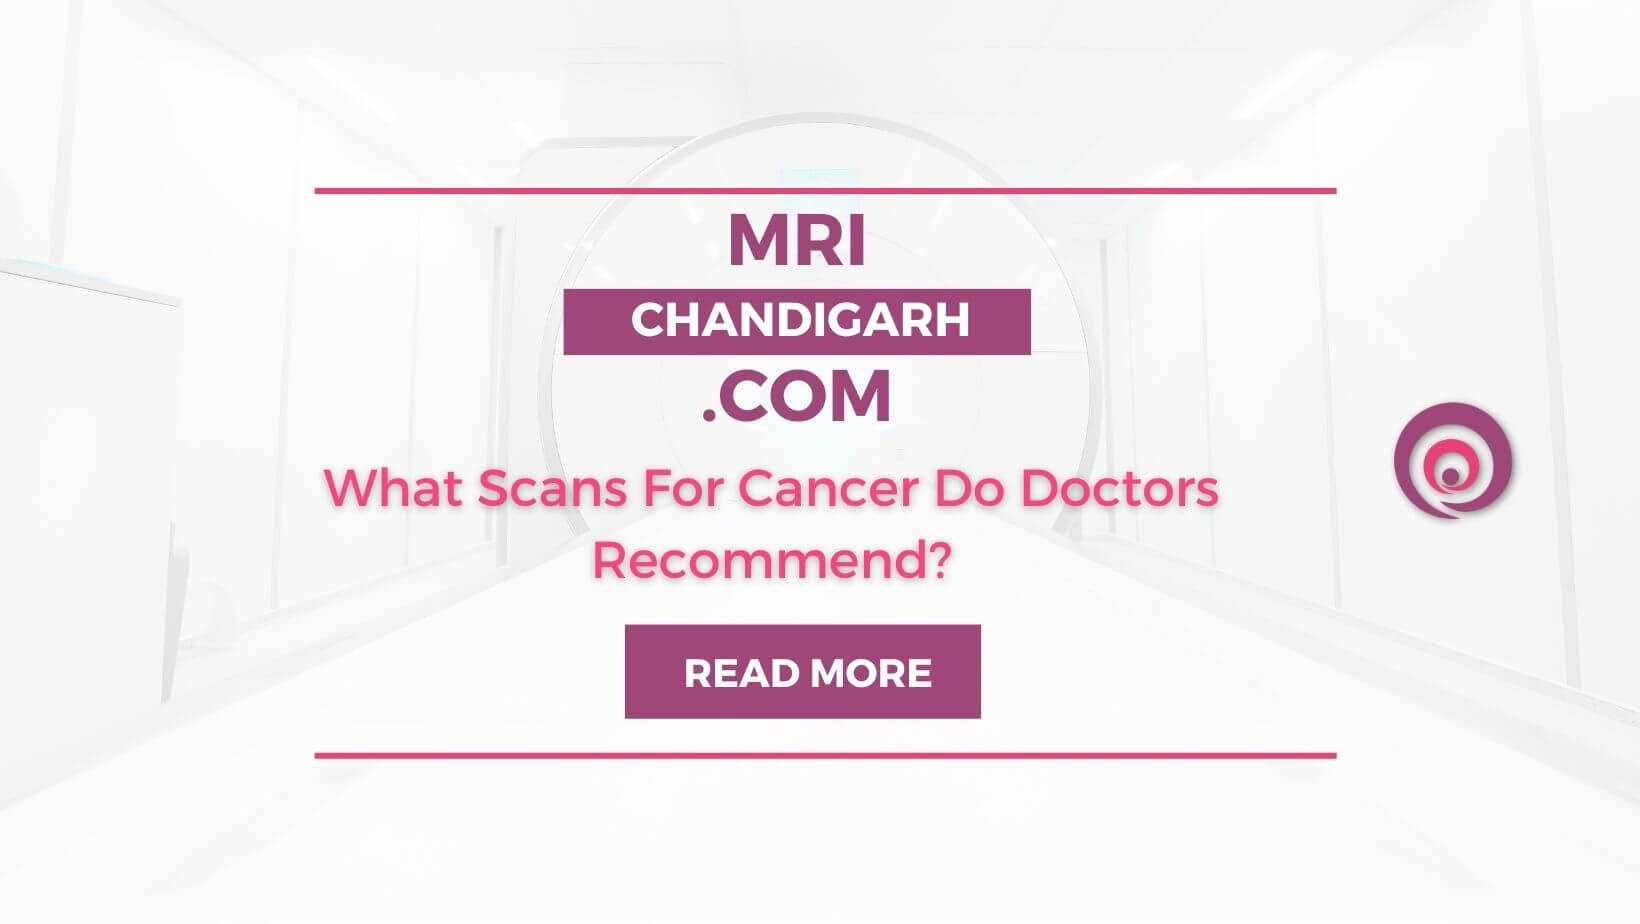 What Scans For Cancer Do Doctors Recommend?